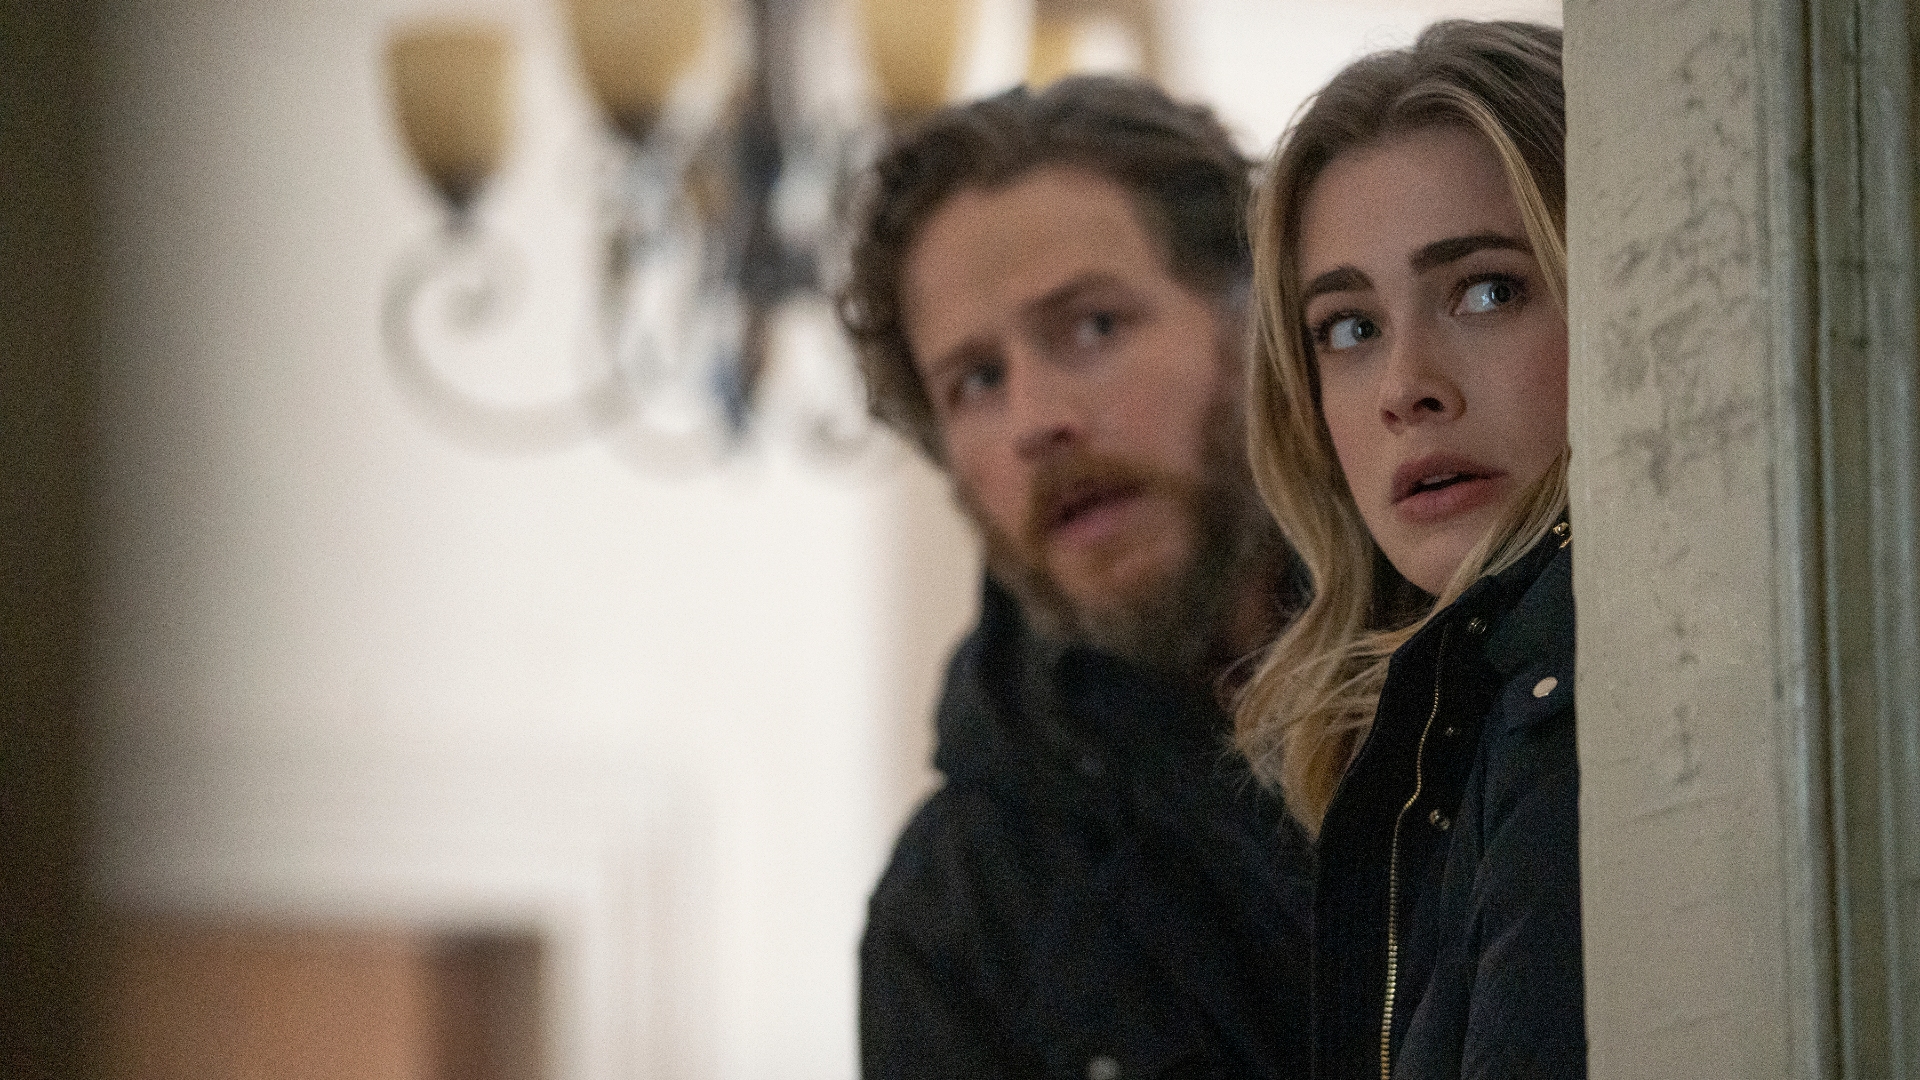 The second half of Manifest season 4 will consist of ten episodes.